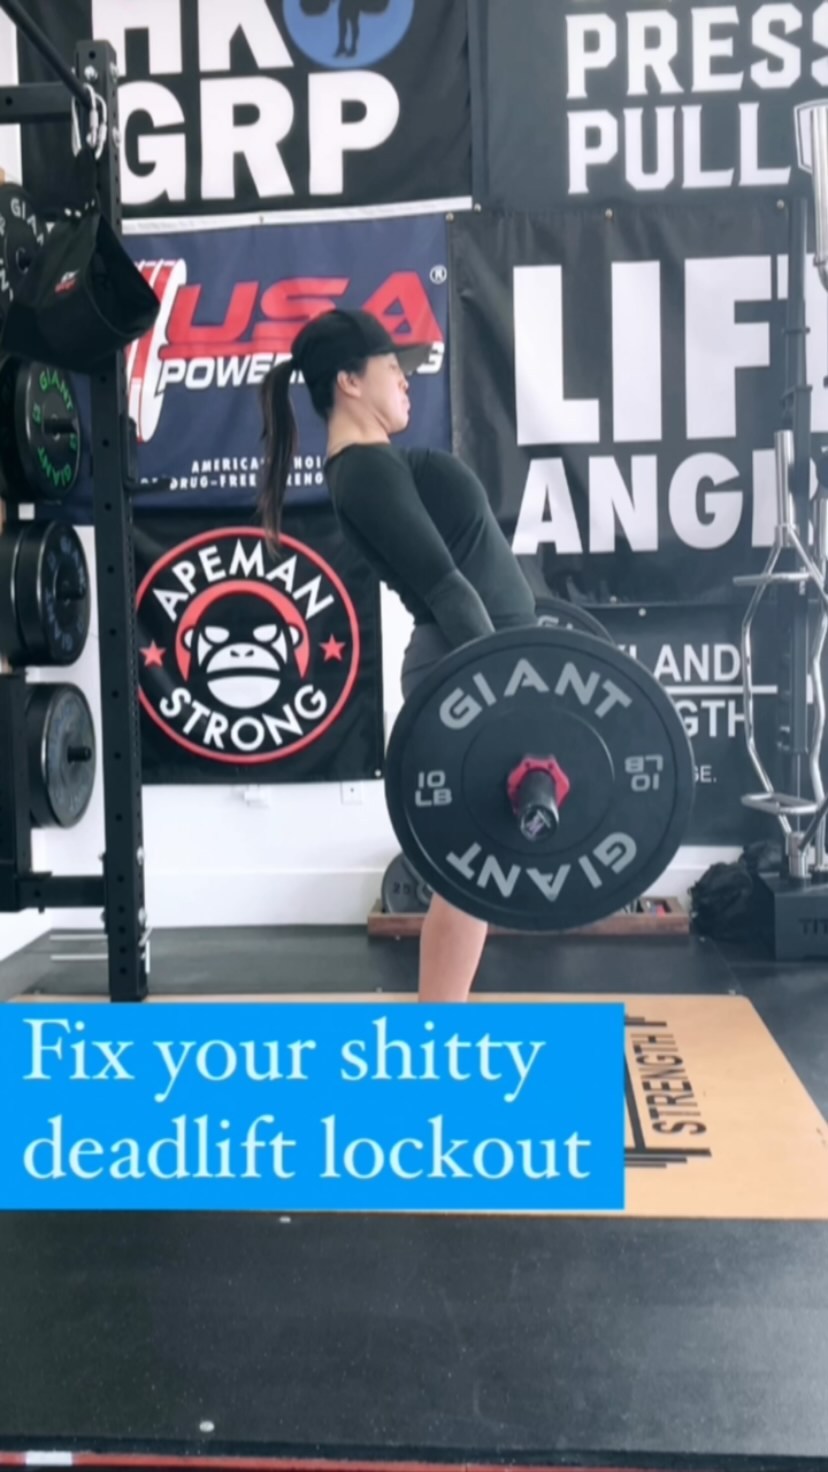 Stop leaning back at the end of your deadlift. Fix that shit. (Volume up)

Hyperextending or over arching your back under heavy loads probably isn’t going to feel super amazing over time. ☠️⚰️🪦

——————————————-
 Follow:  IG @strength_coach_Cindy
️ Download Free Macro Calculator for Lifters : Link in Bio
 Apply for 1-on-1 Online Coaching: Link in Bio
——————————————-